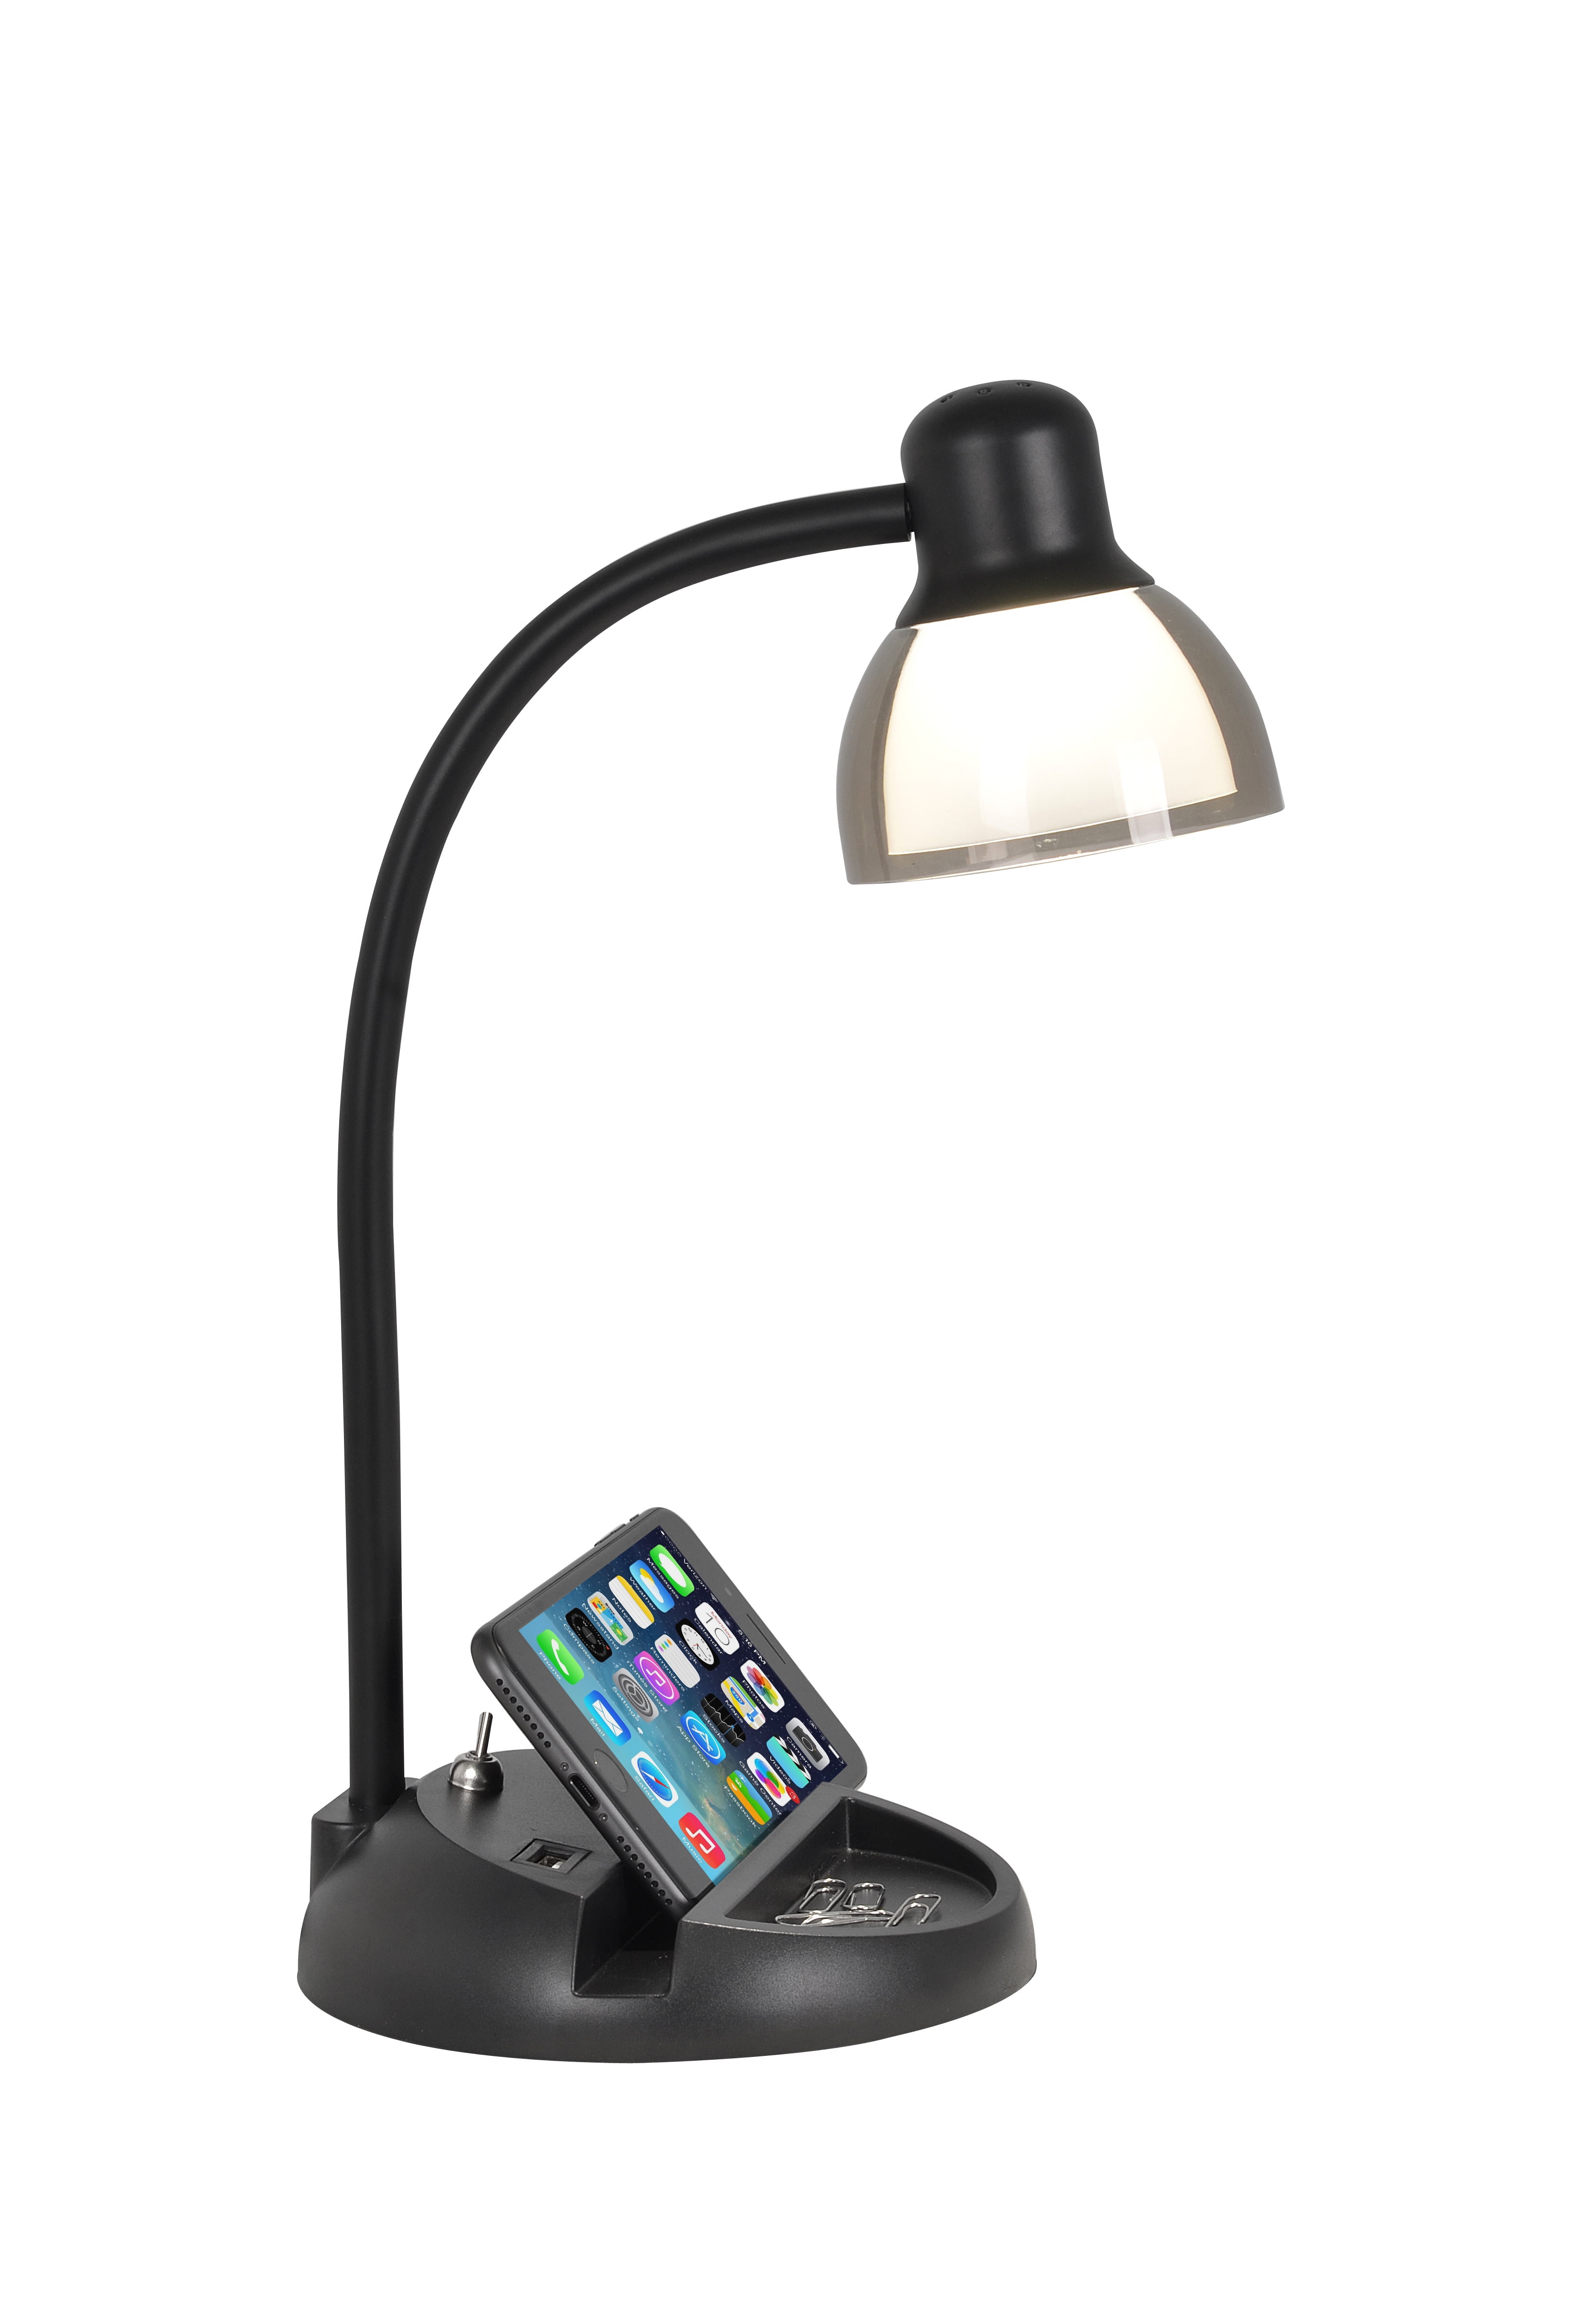 Mainstays LED Desk Lamp with USB Port and Storage Slots   Walmart 